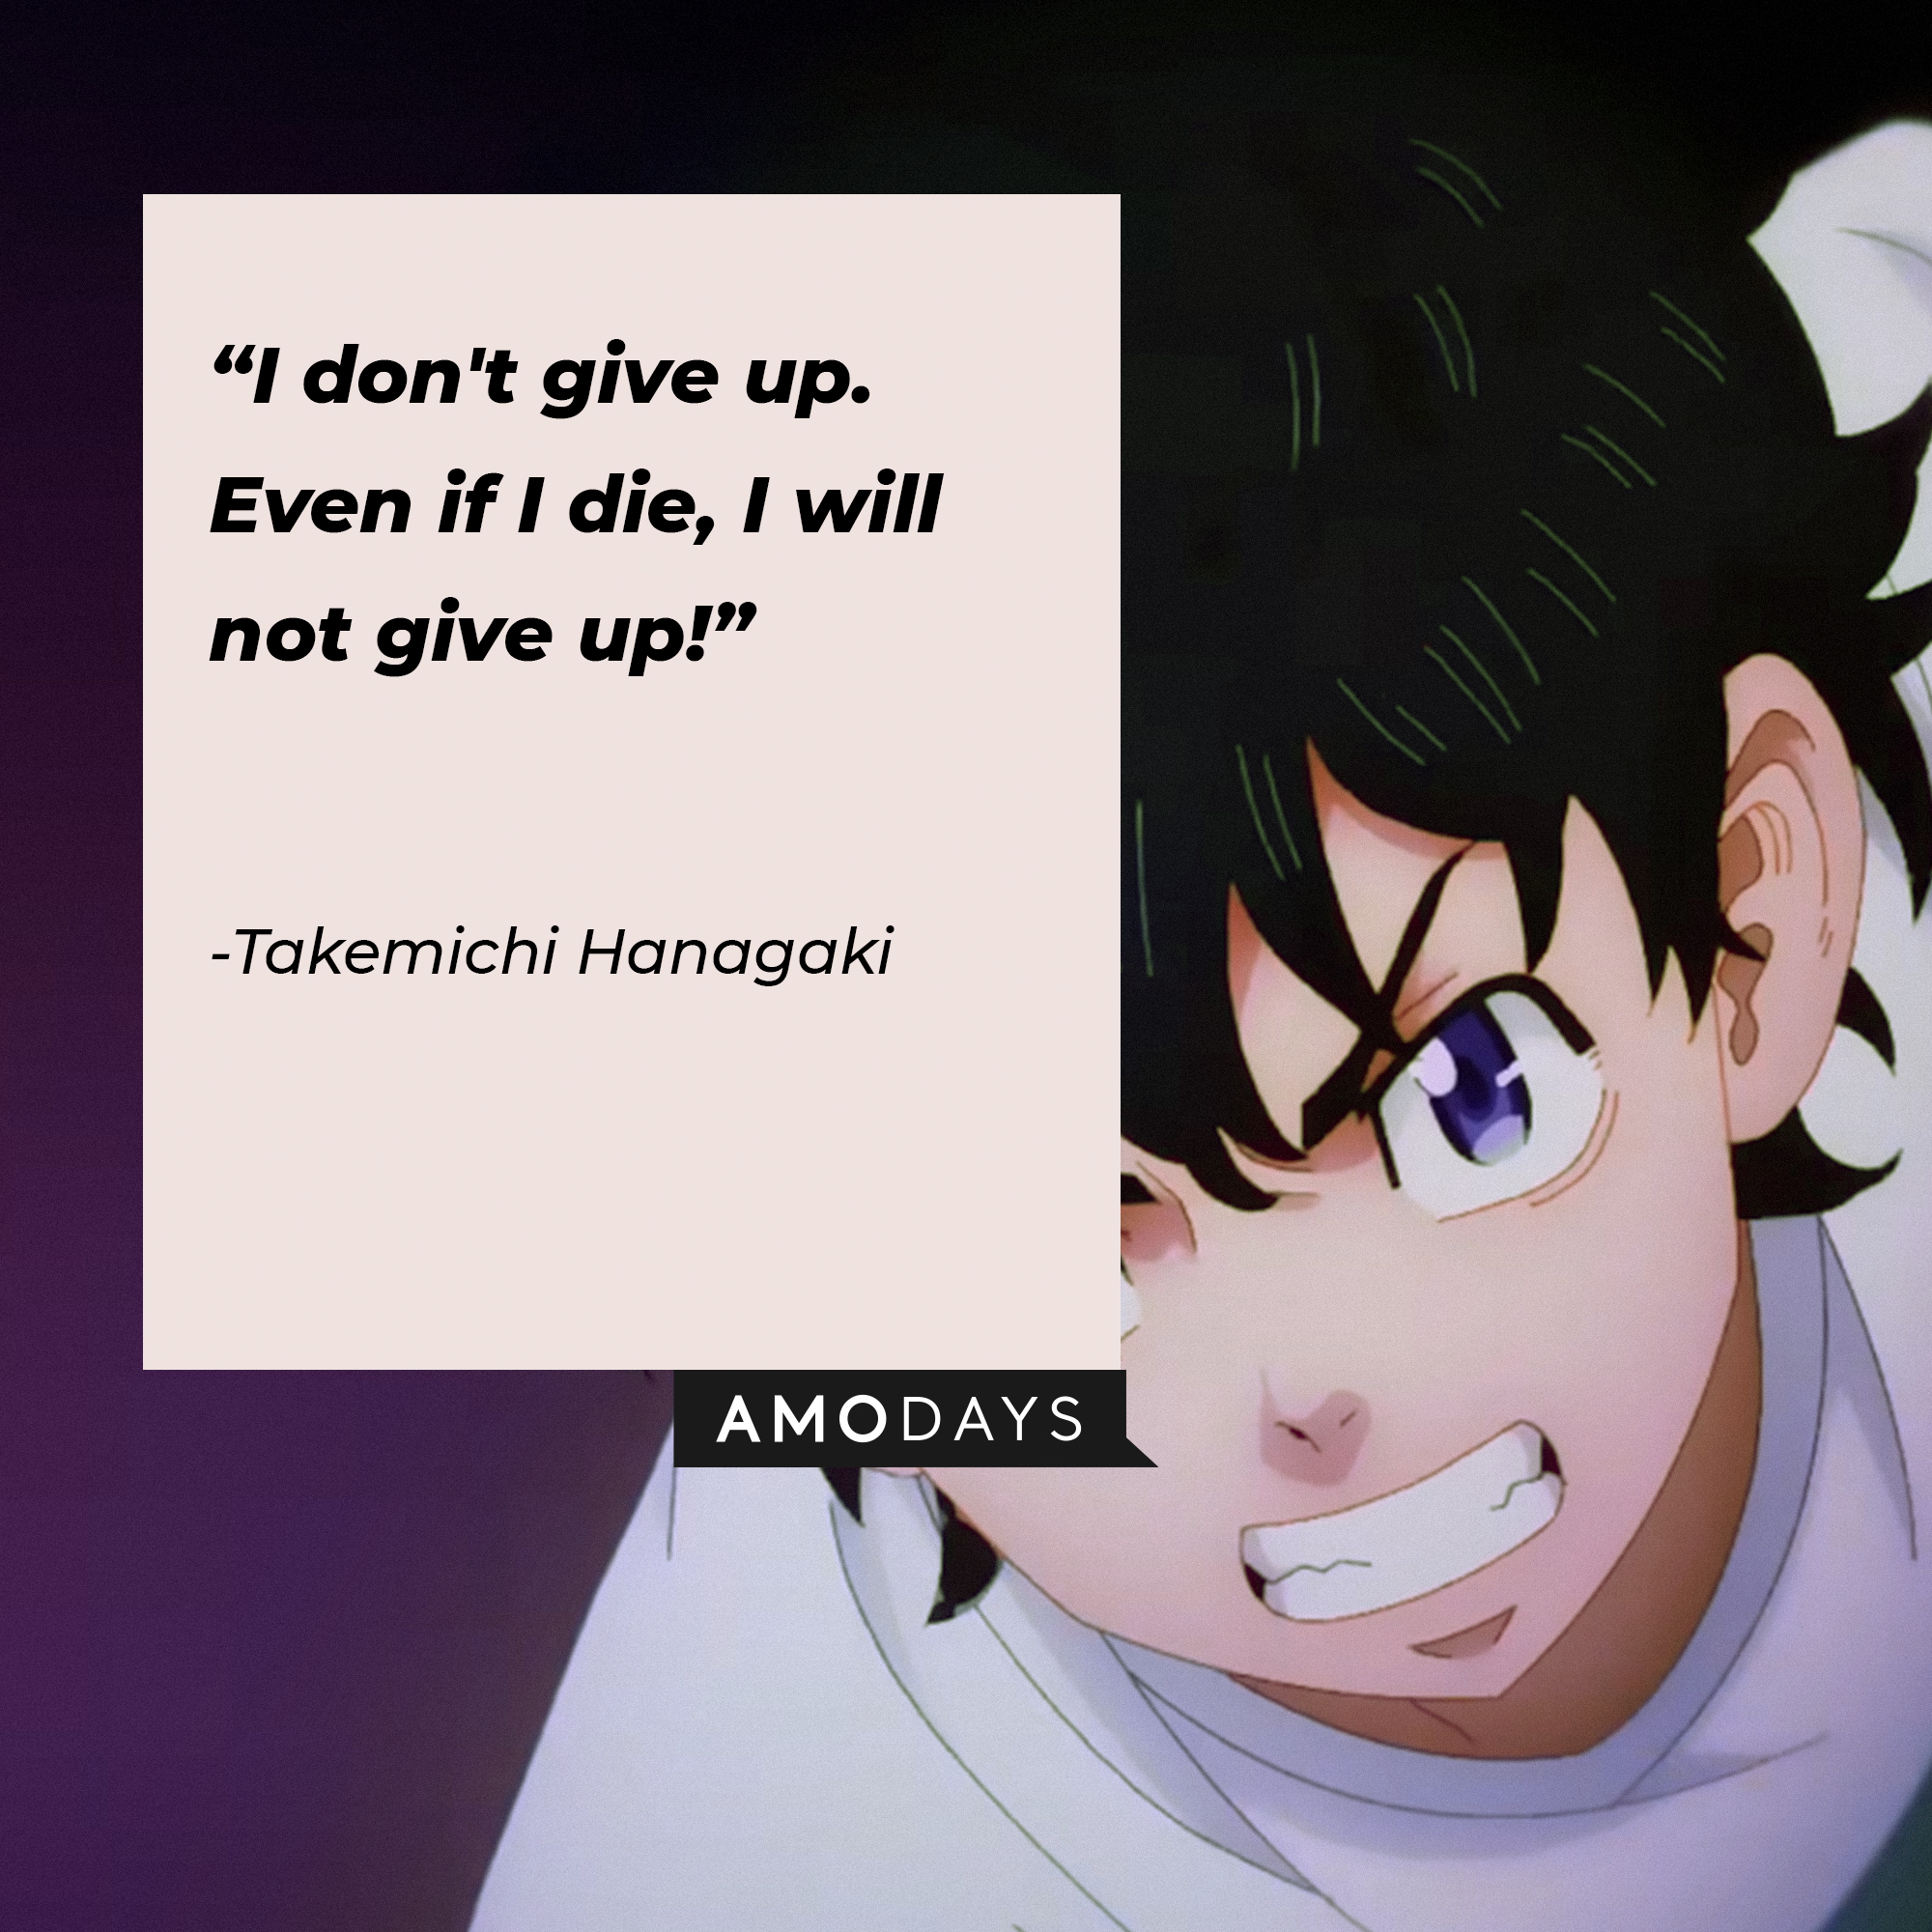 Takemichi Hanagaki's quote: "I don't give up. Even if I die, I will not give up!" | Source: Youtube.com/Crunchyroll Collection